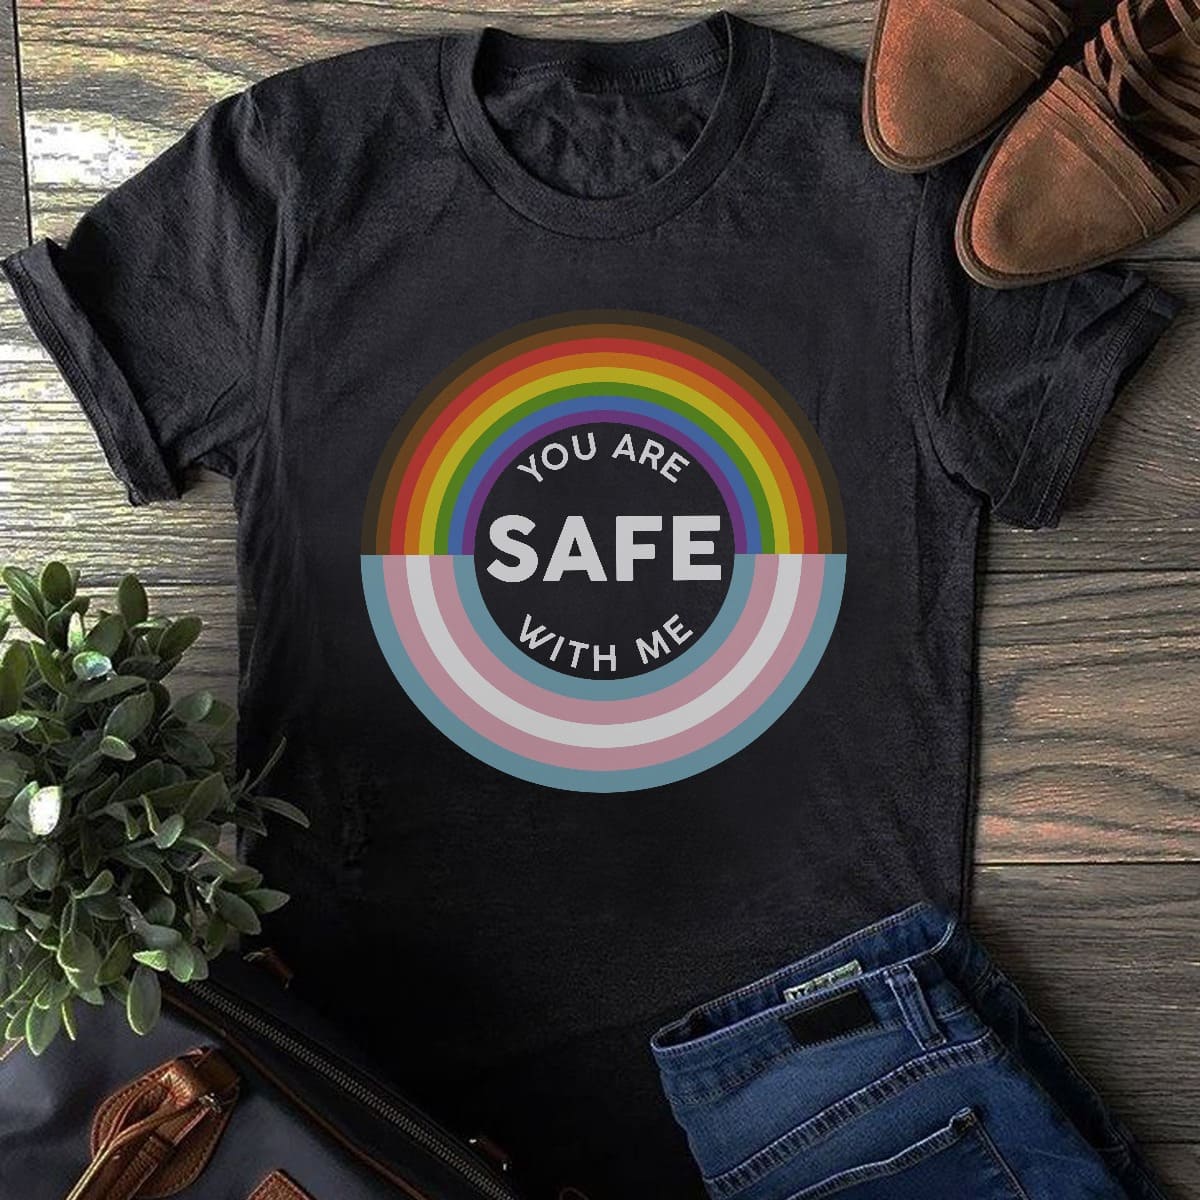 You are safe with me - Lgbt community, feminism right T-shirt